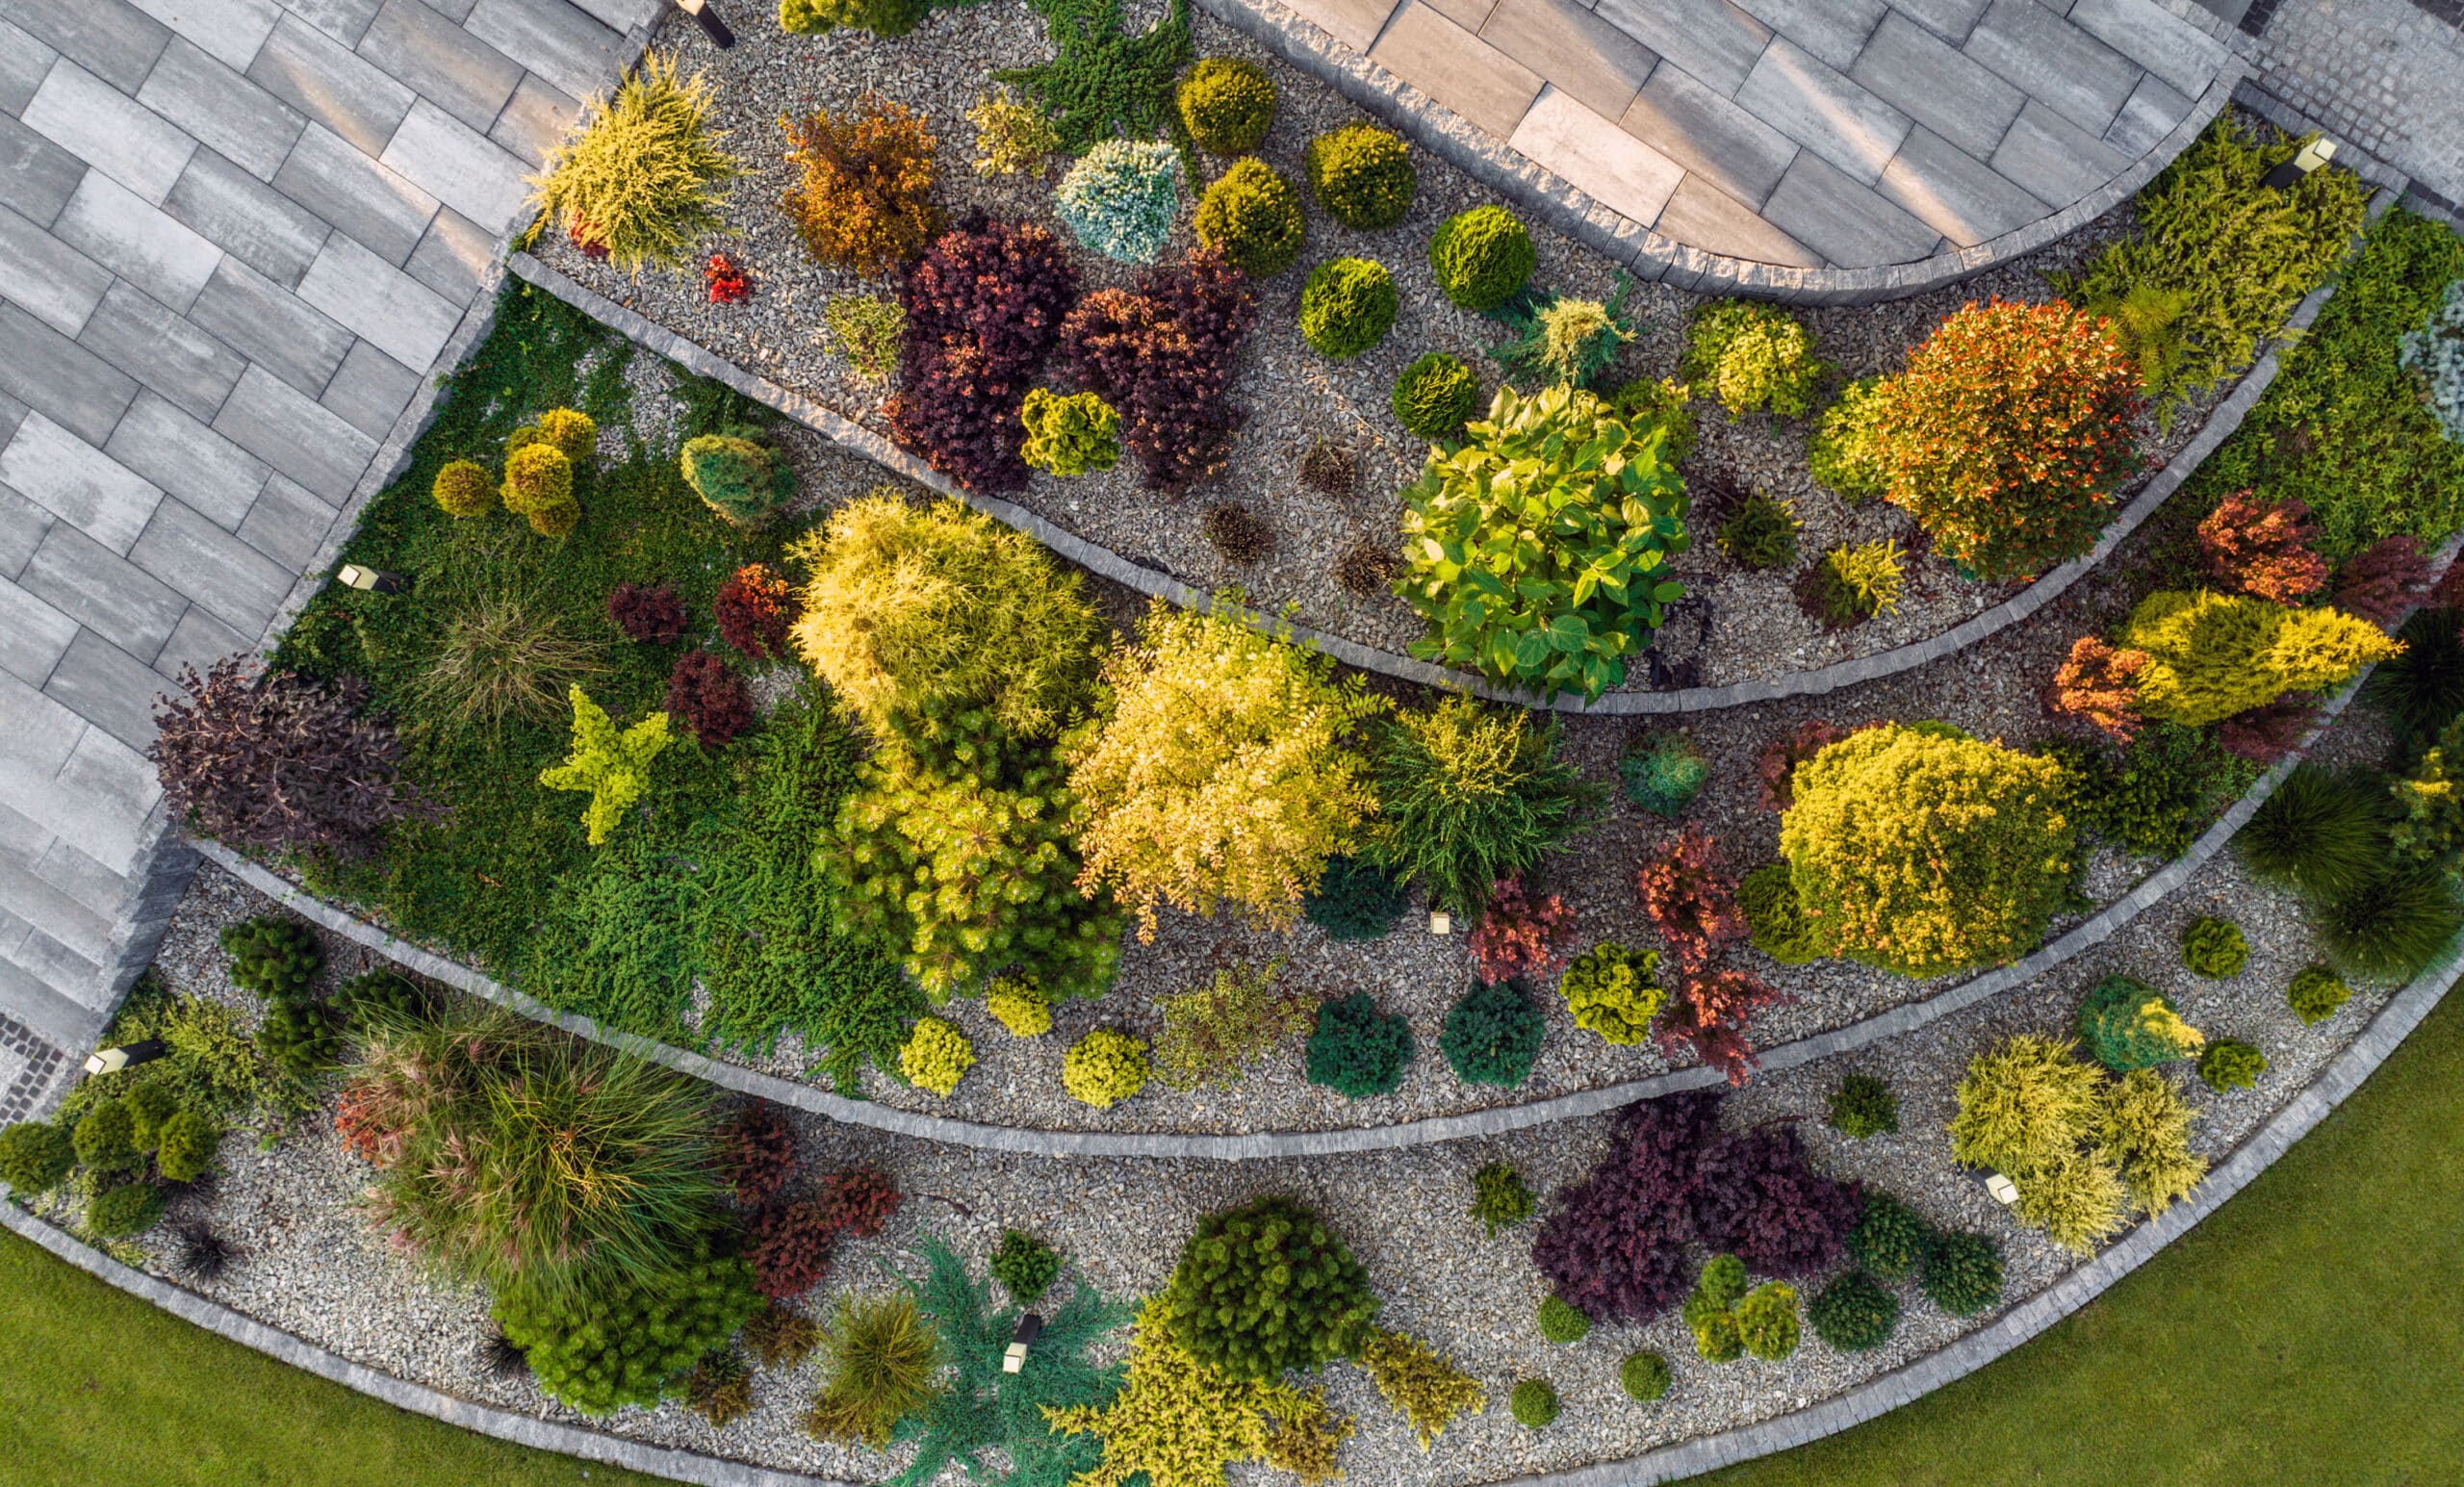 5 Outstanding Ideas To Enhance Your Landscaping With Rocks 3 | aerial view of a rockery backyard garden 2022 12 16 11 42 18 utc scaled